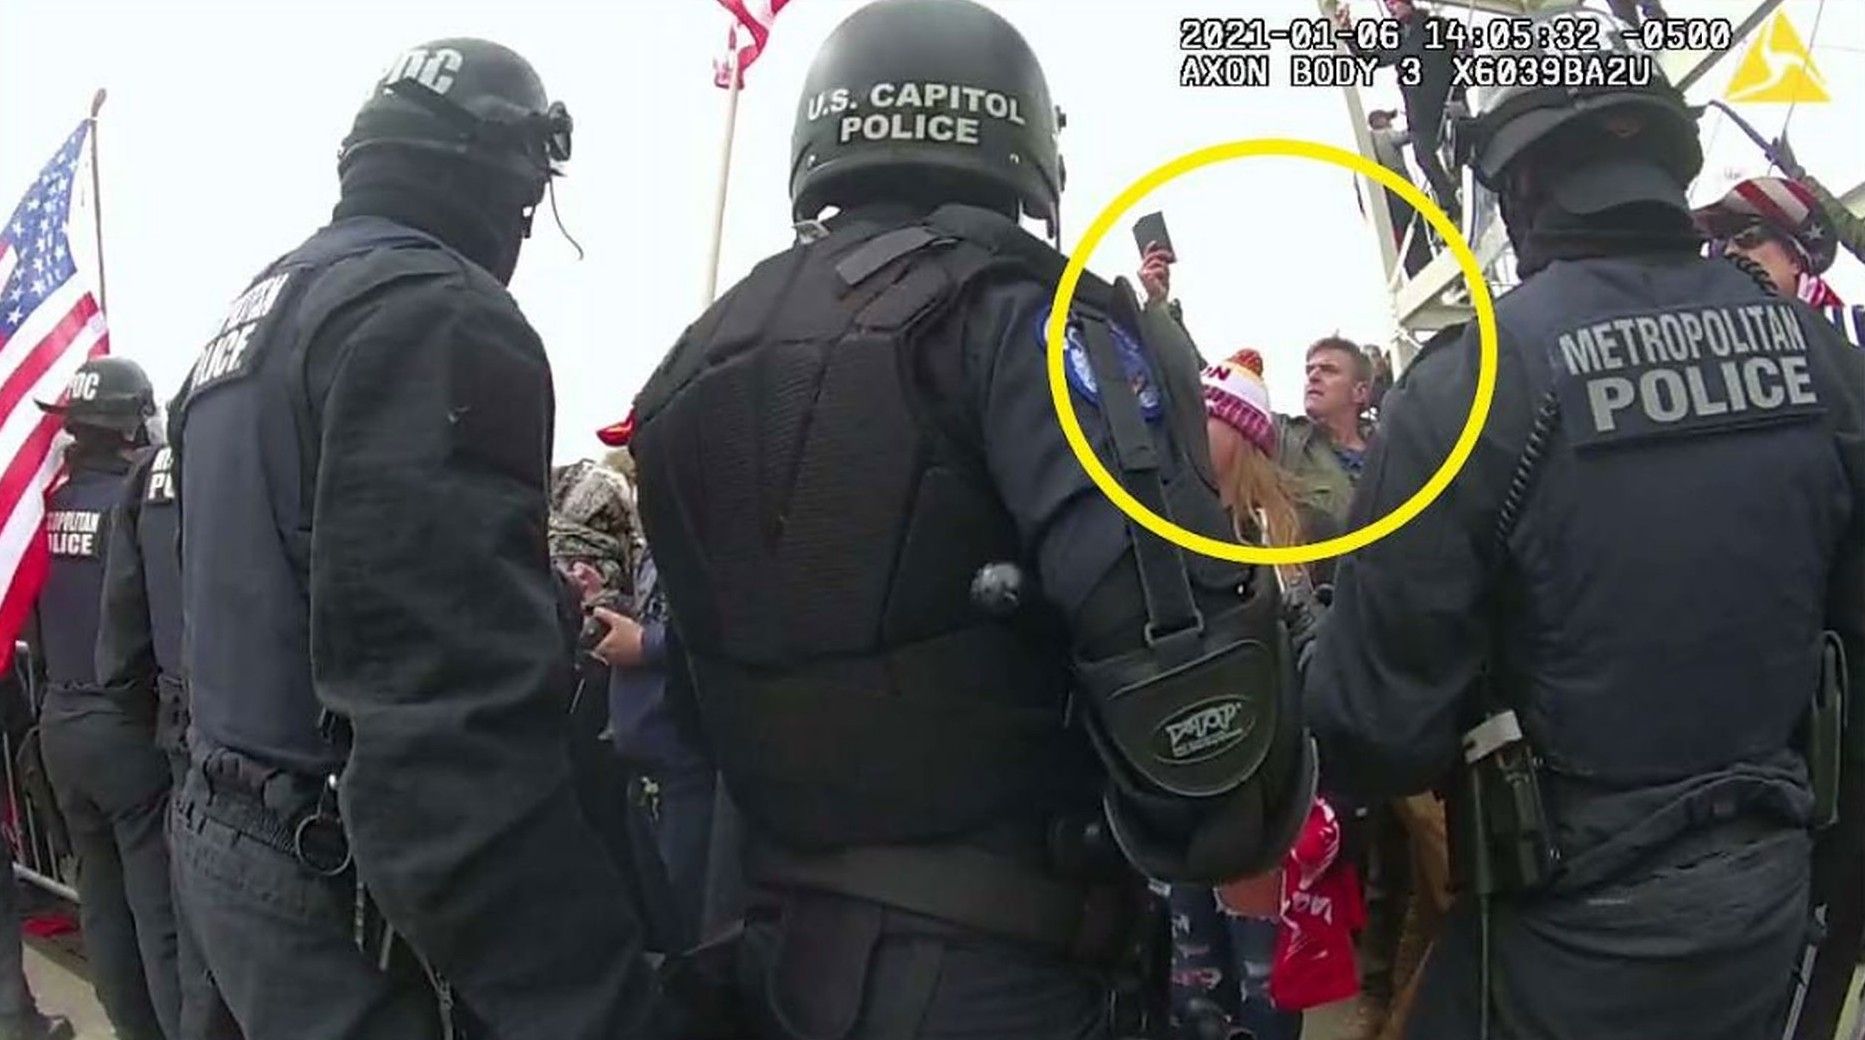 A man (circled) identified by prosecutors as Jay James Johnston wearing a green camouflage neck gaiter and a dark leather jacket.